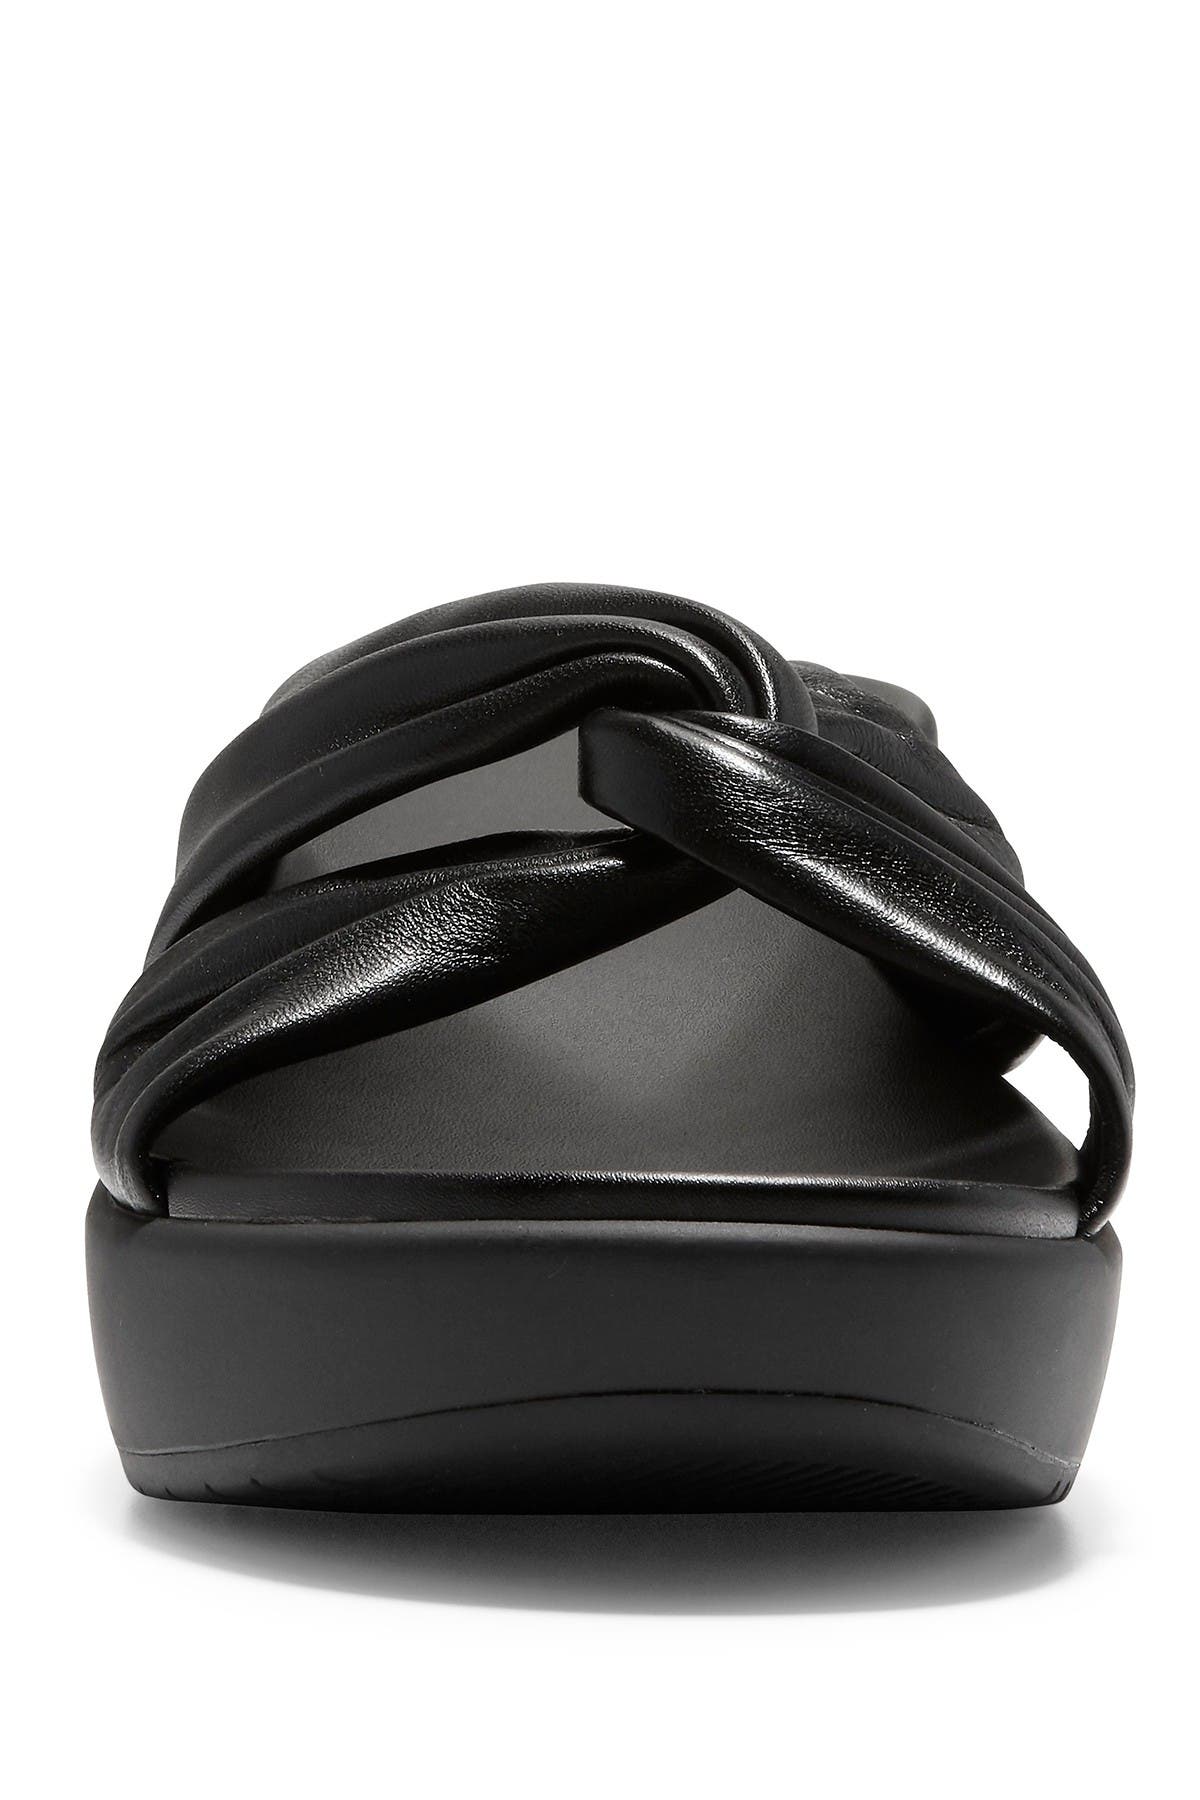 cole haan aubree grand knotted slide sandal